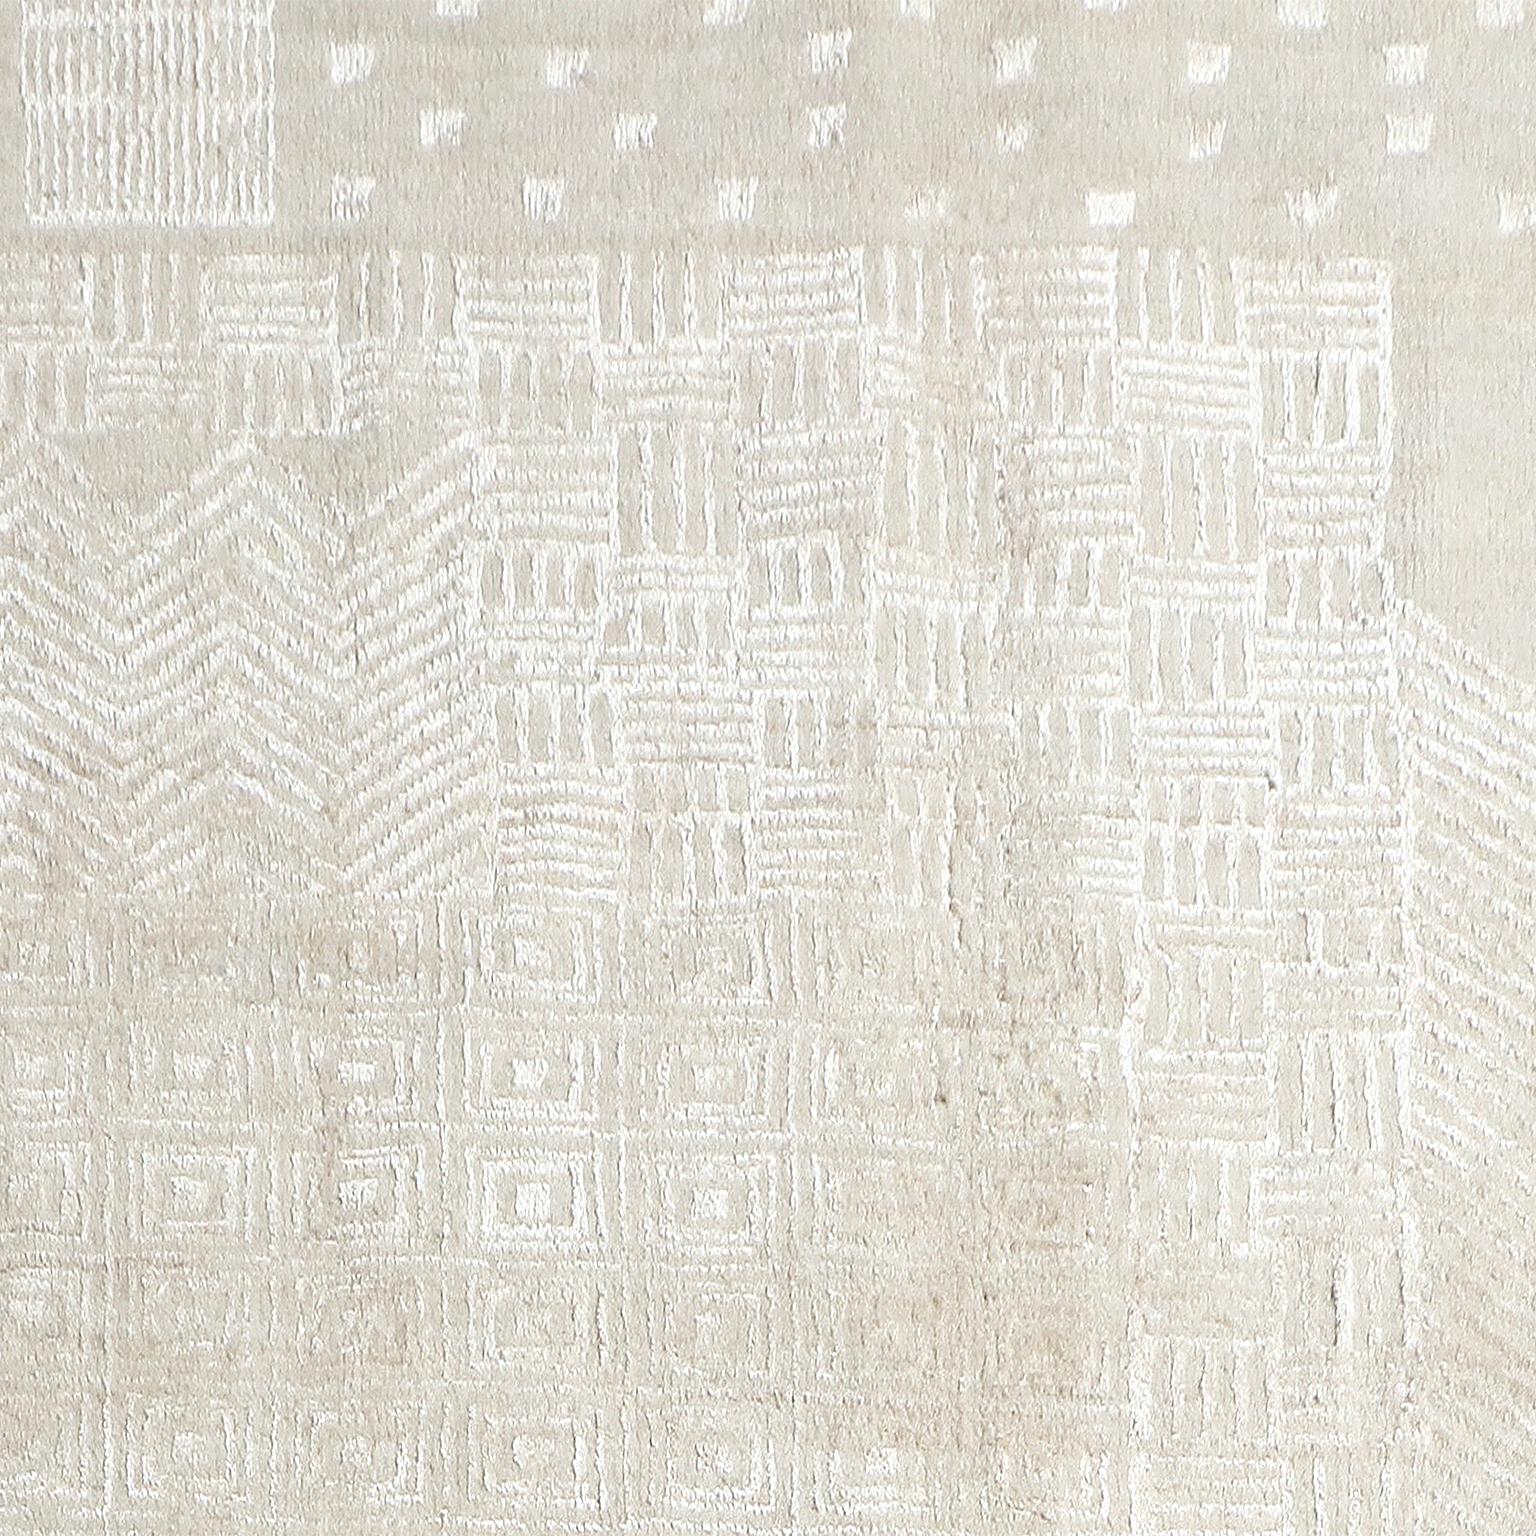 This white on white carpet, sized 5' x 7', utilizes wool in the background and real silk from silkworms in the design. The tone on tone design inspired by Art Deco traditions creates a subtle overall effect while shining, both literally and